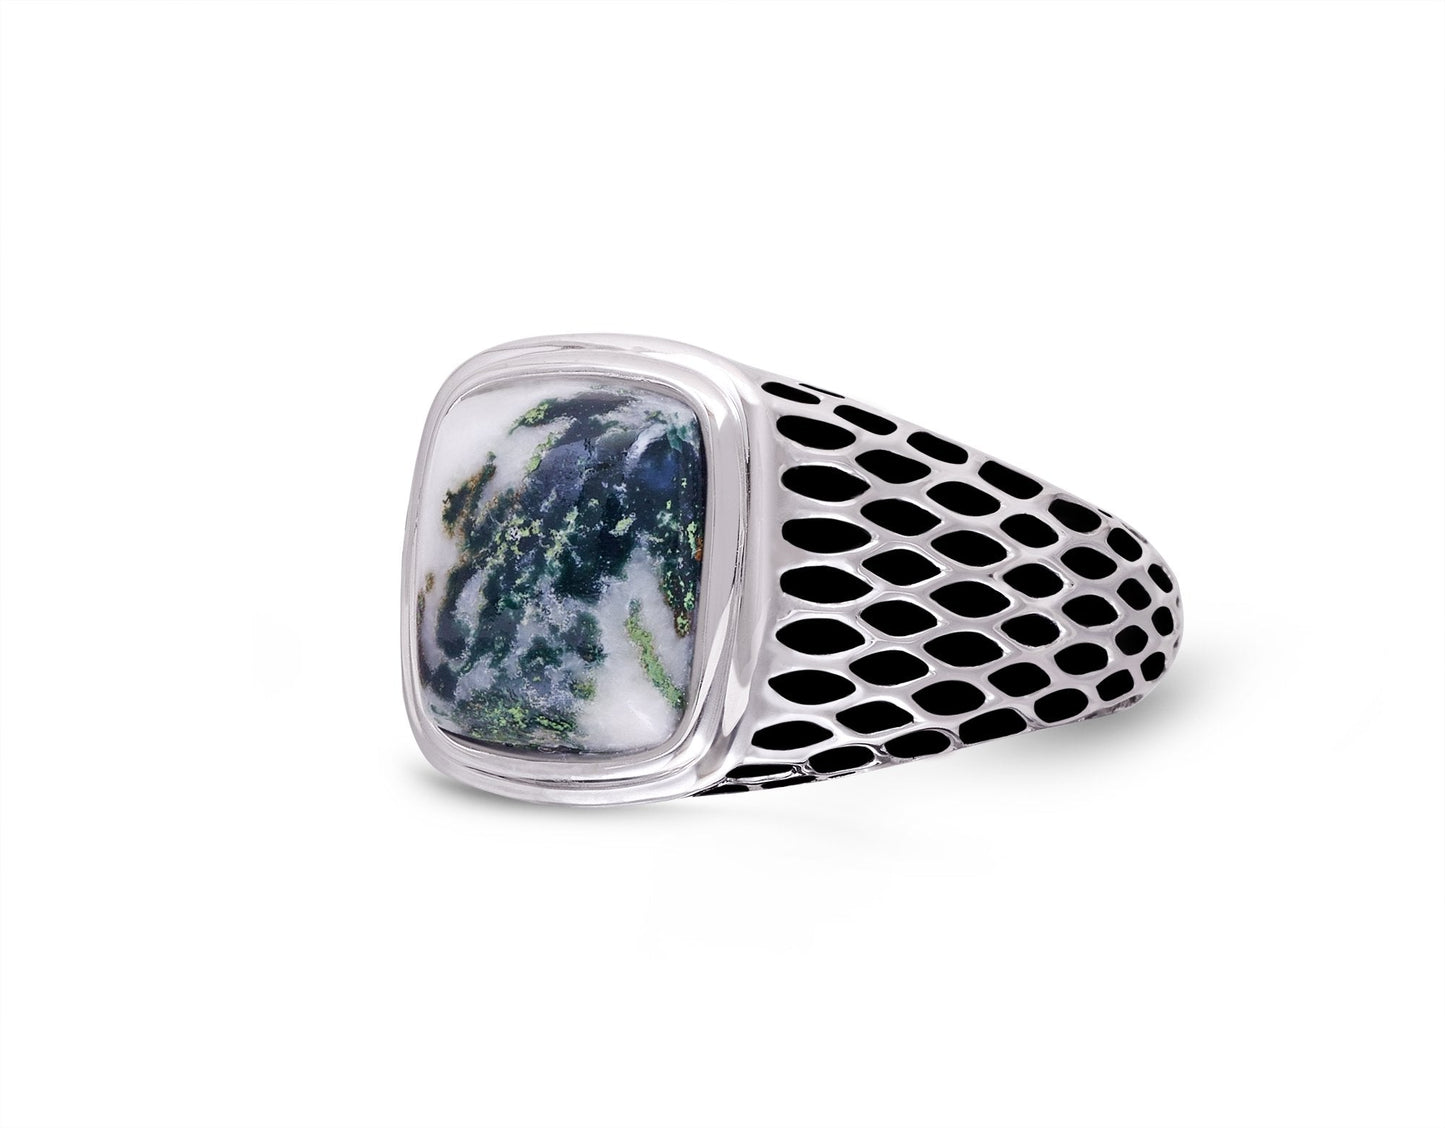 Tree Agate Stone Signet Ring in Black Rhodium Plated Sterling Silver by LuvMyJewelry